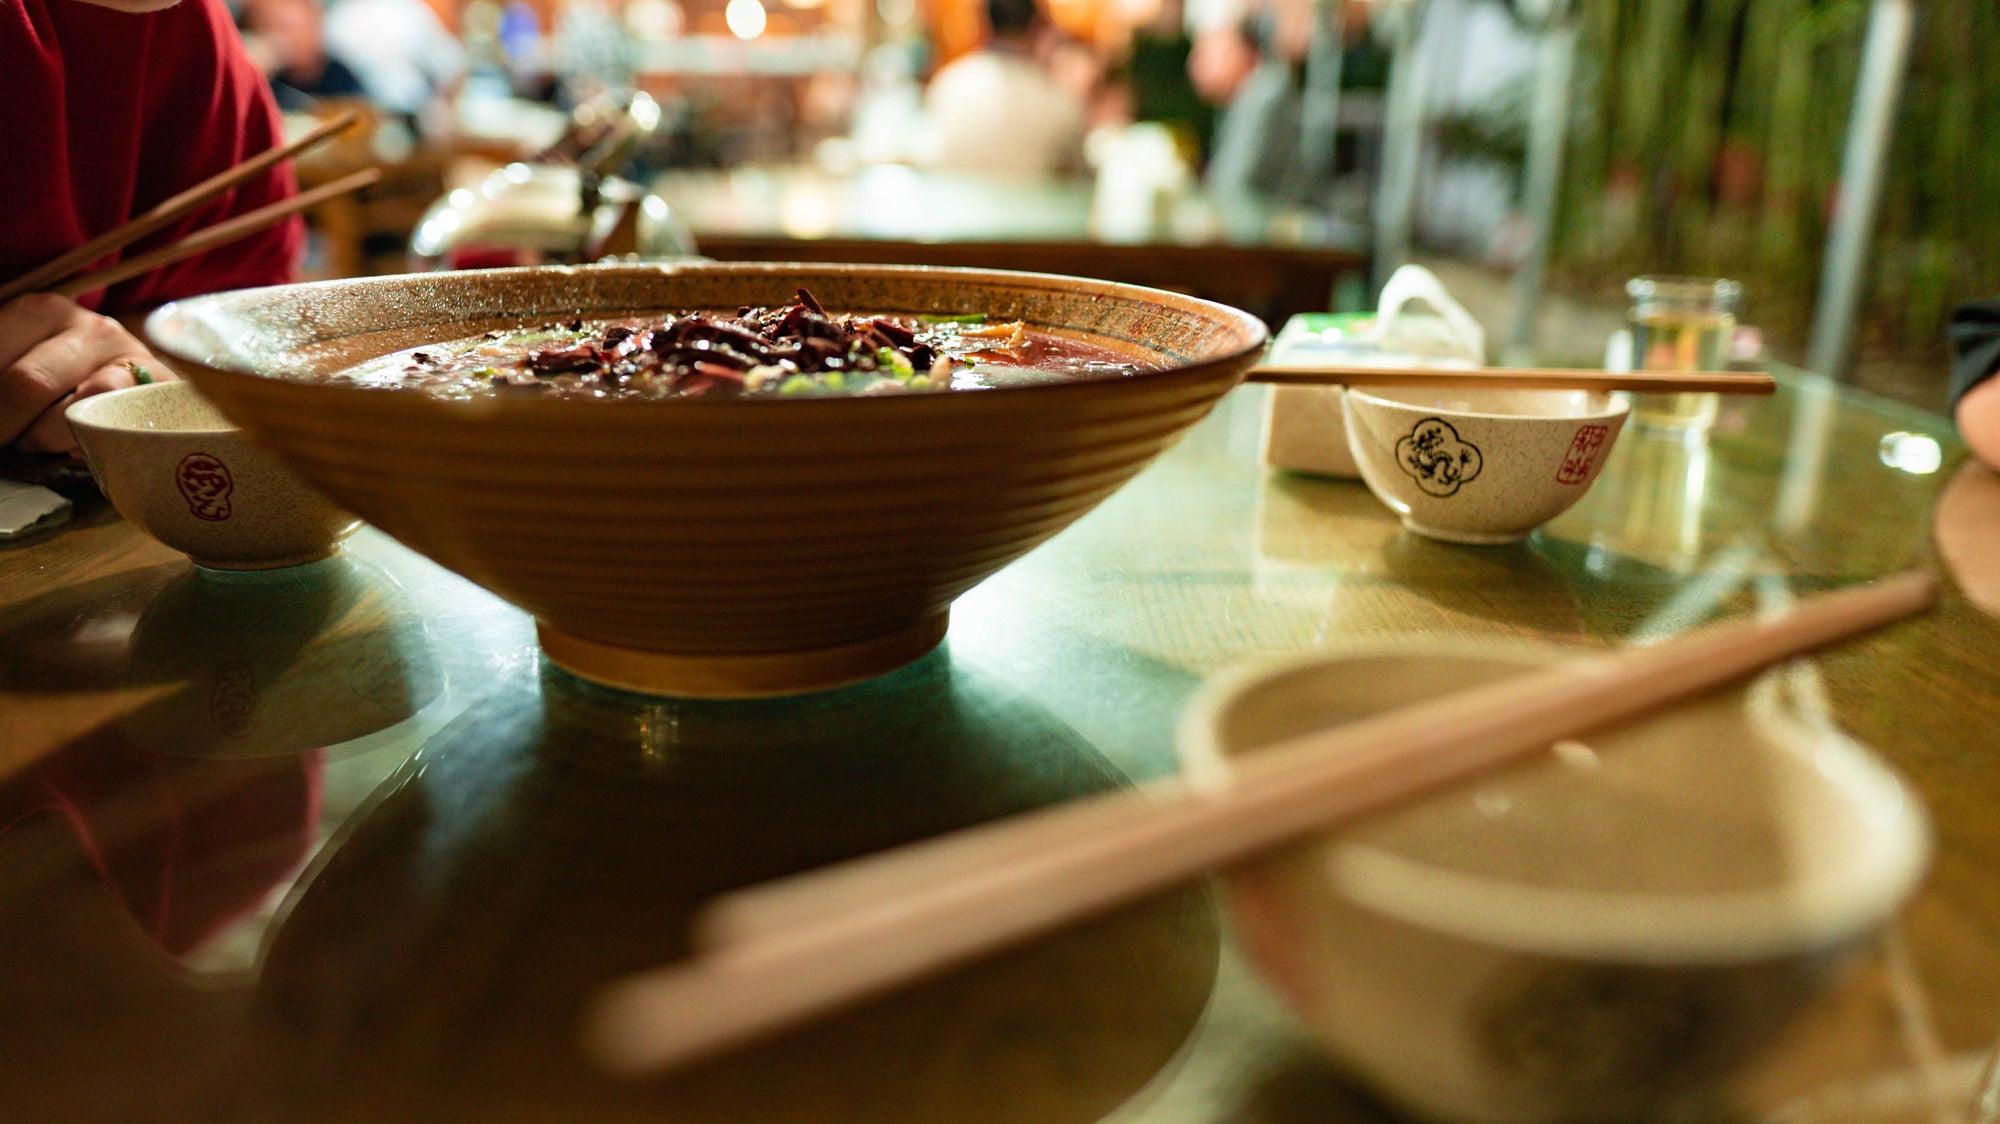 Sichuan, the most highly elevated cuisine in the world?